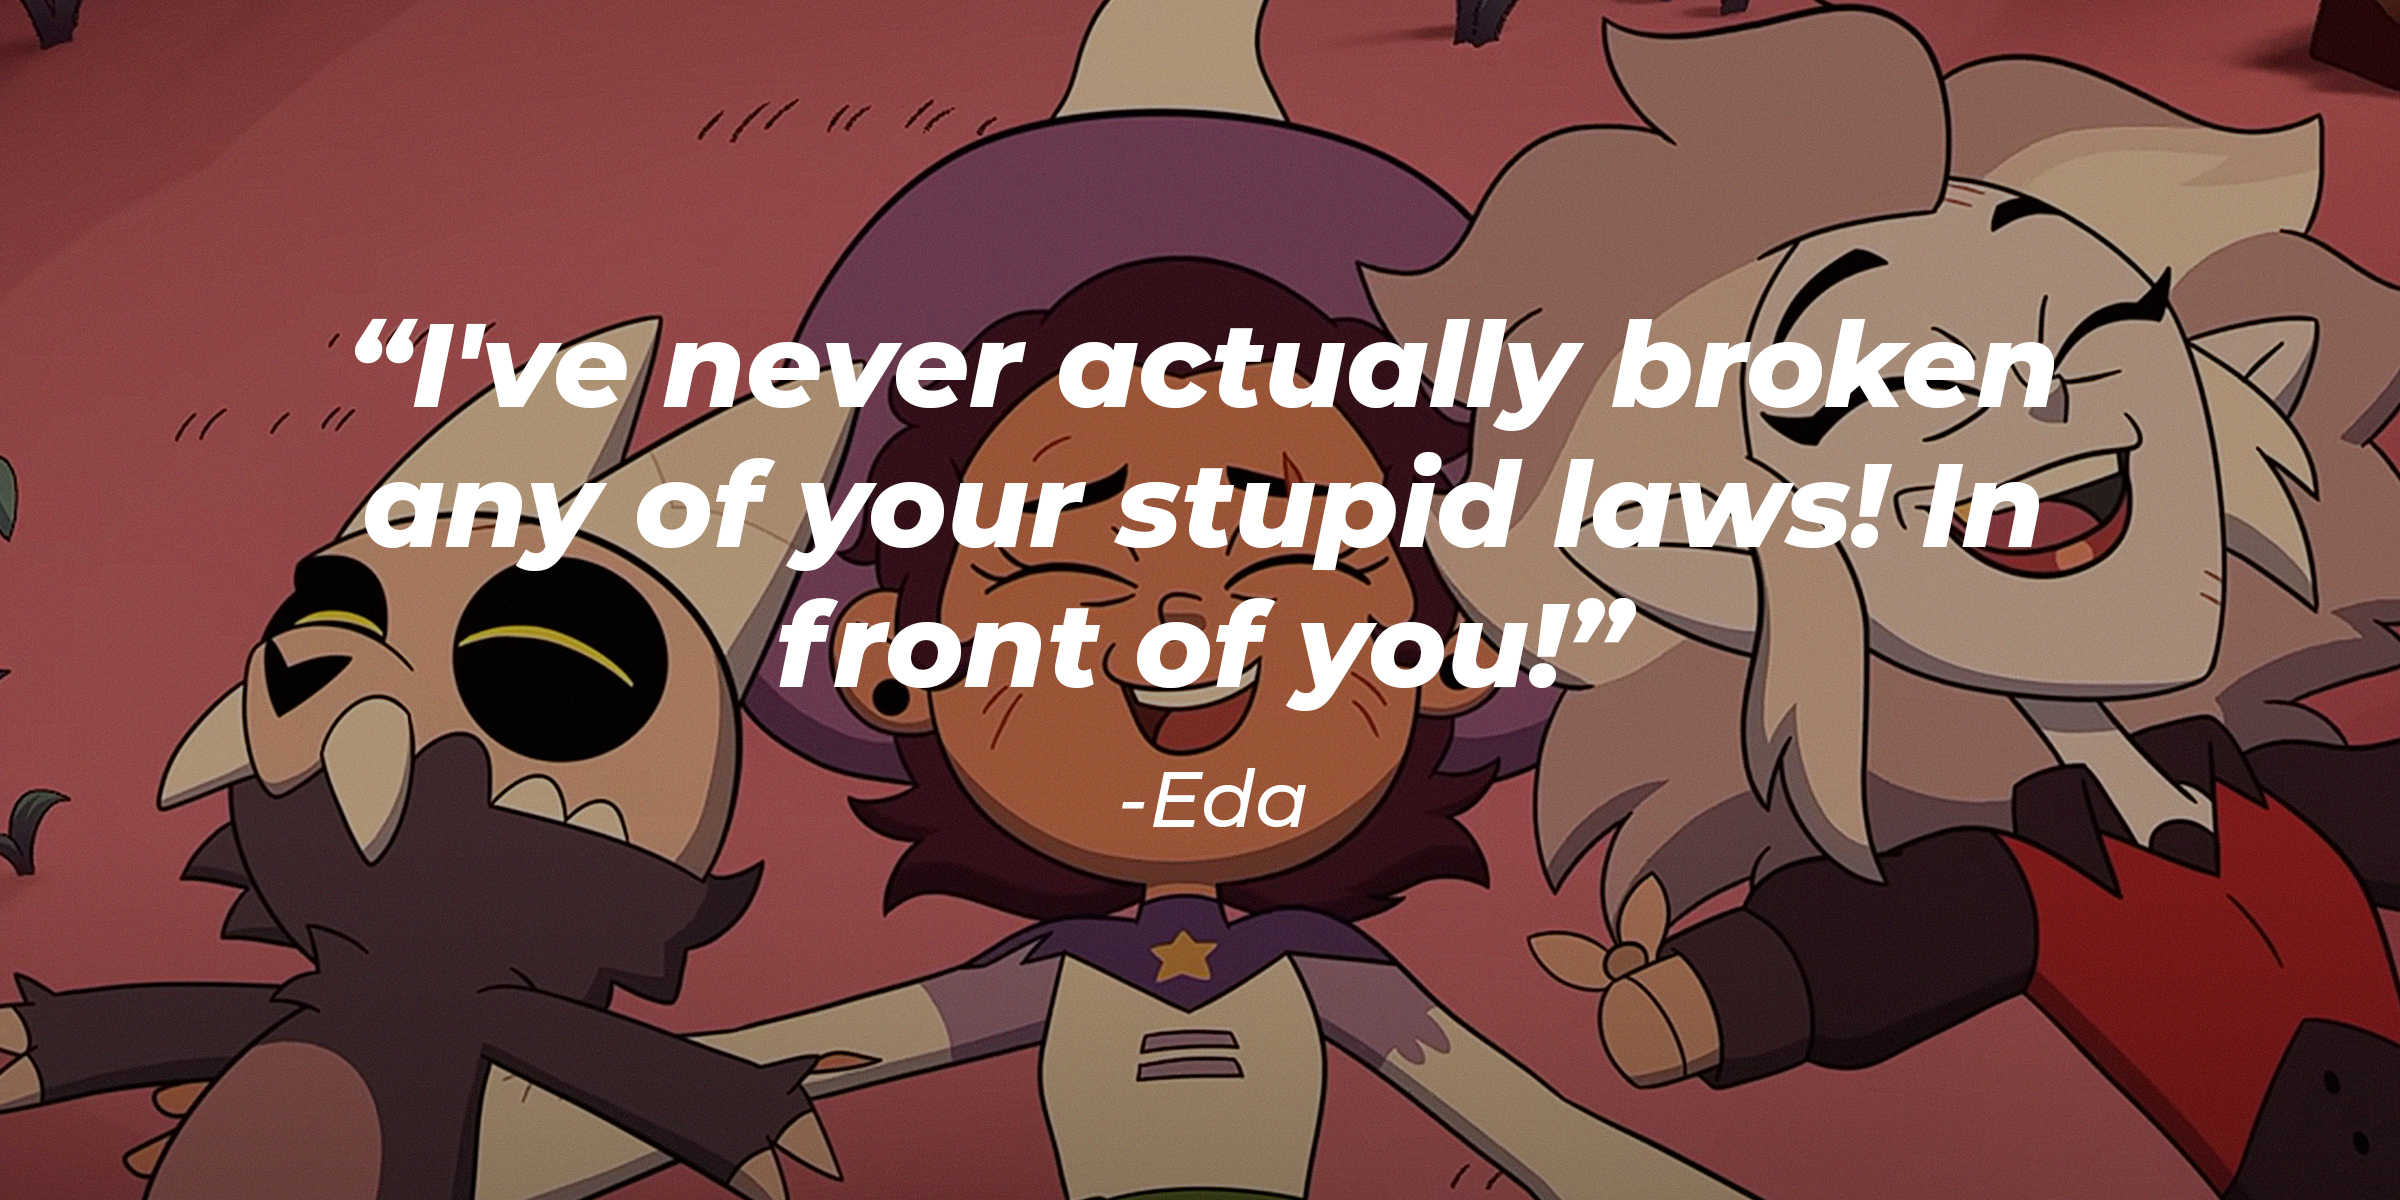 A Photo of King, Luz, and Eda, with Eda's quote, "I’ve Never Actually Broken Any of Your Stupid Laws! In Front of You!" | Source: YouTube/disneychannel